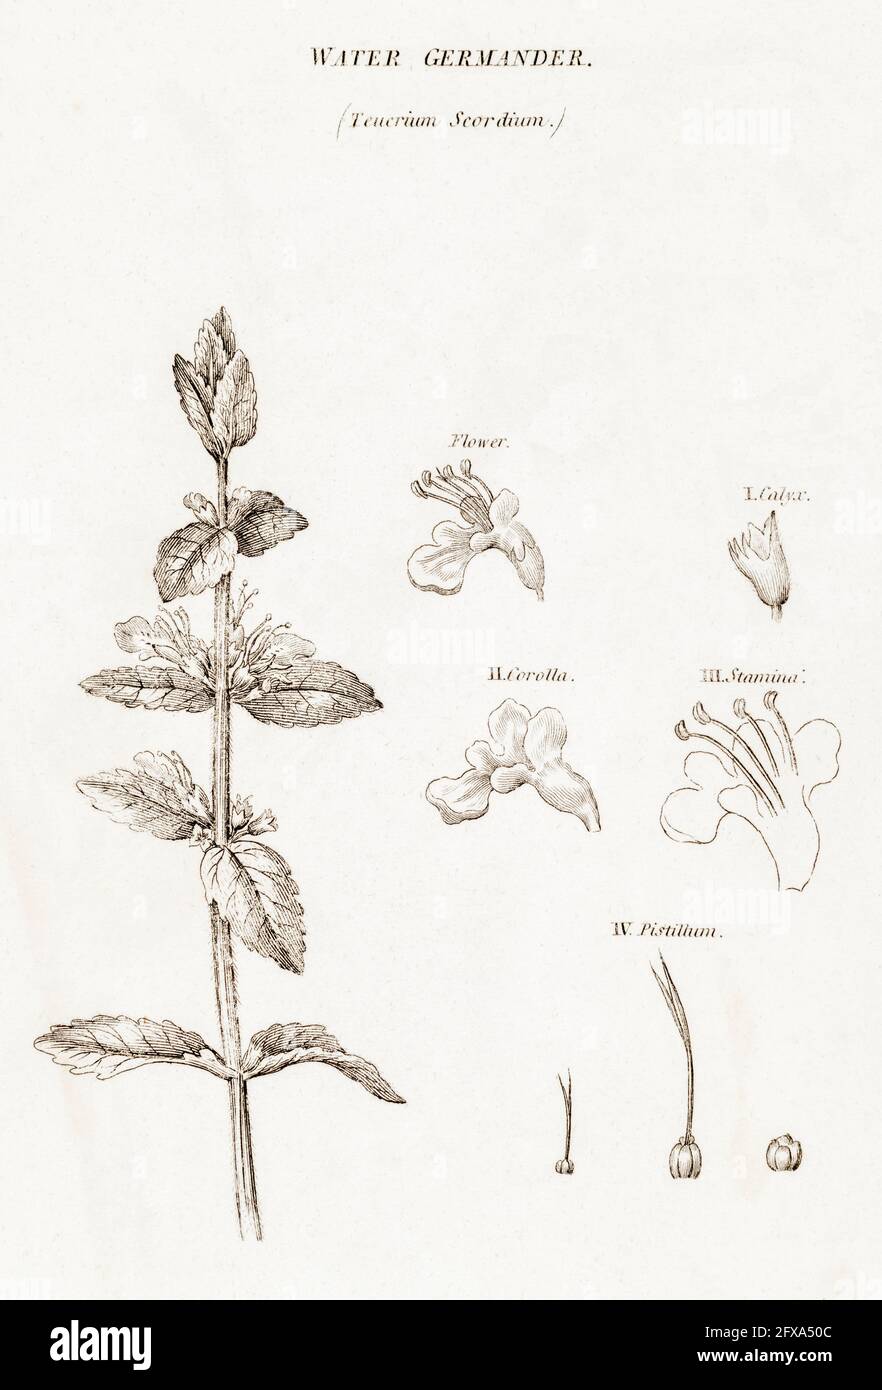 Copperplate botanical illustration of Water Germander / Teucrium scordium from Robert Thornton's British Flora, 1812. Once used as a medicinal plant. Stock Photo